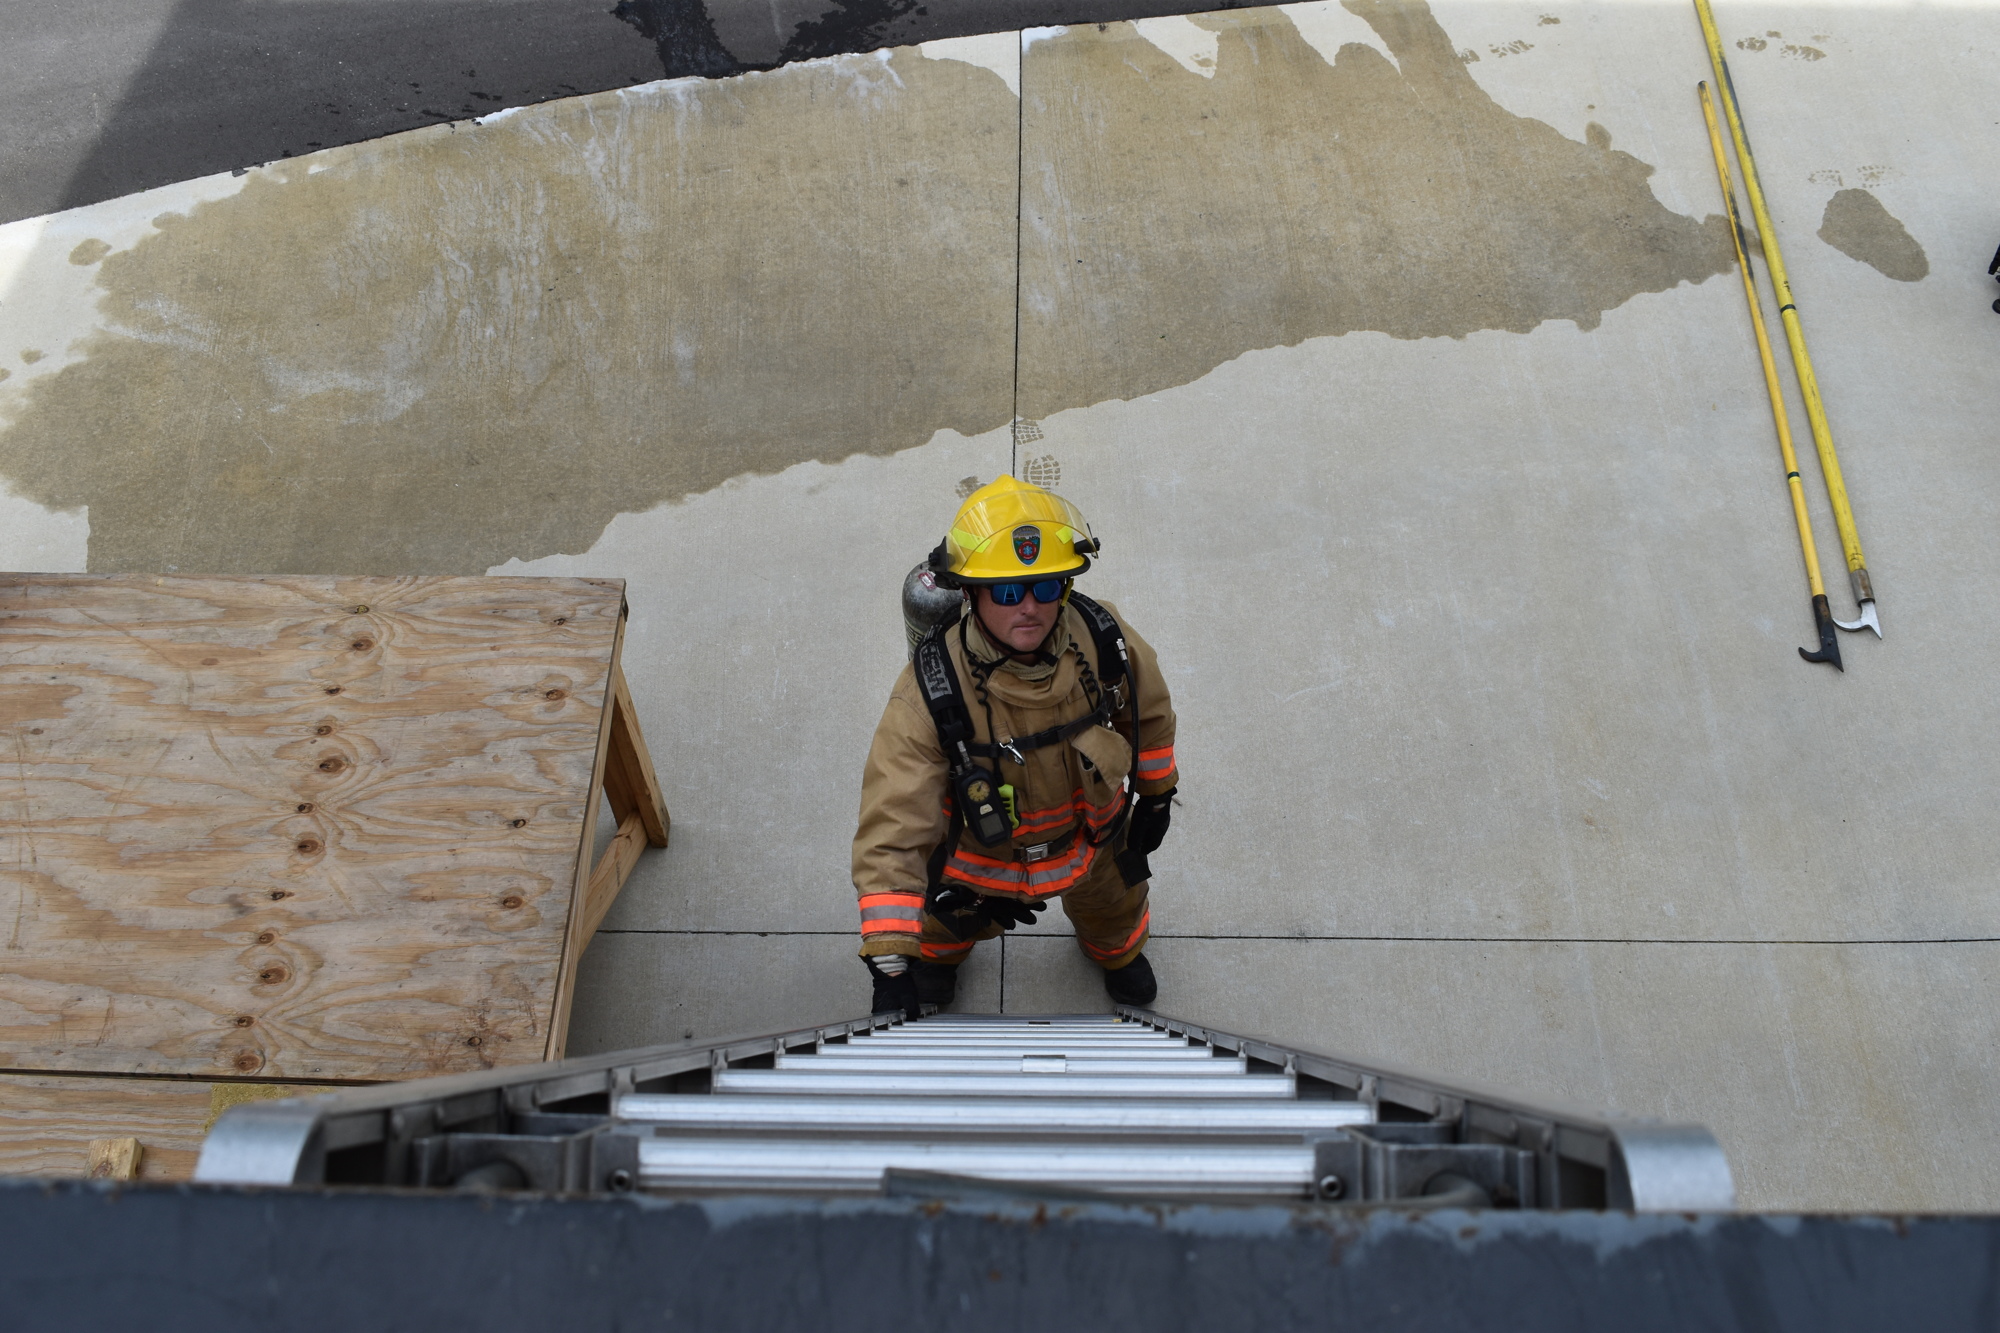 During a training exercise, firefighter Ryan Berggren places a ladder against a window as an exit for other firefighters.